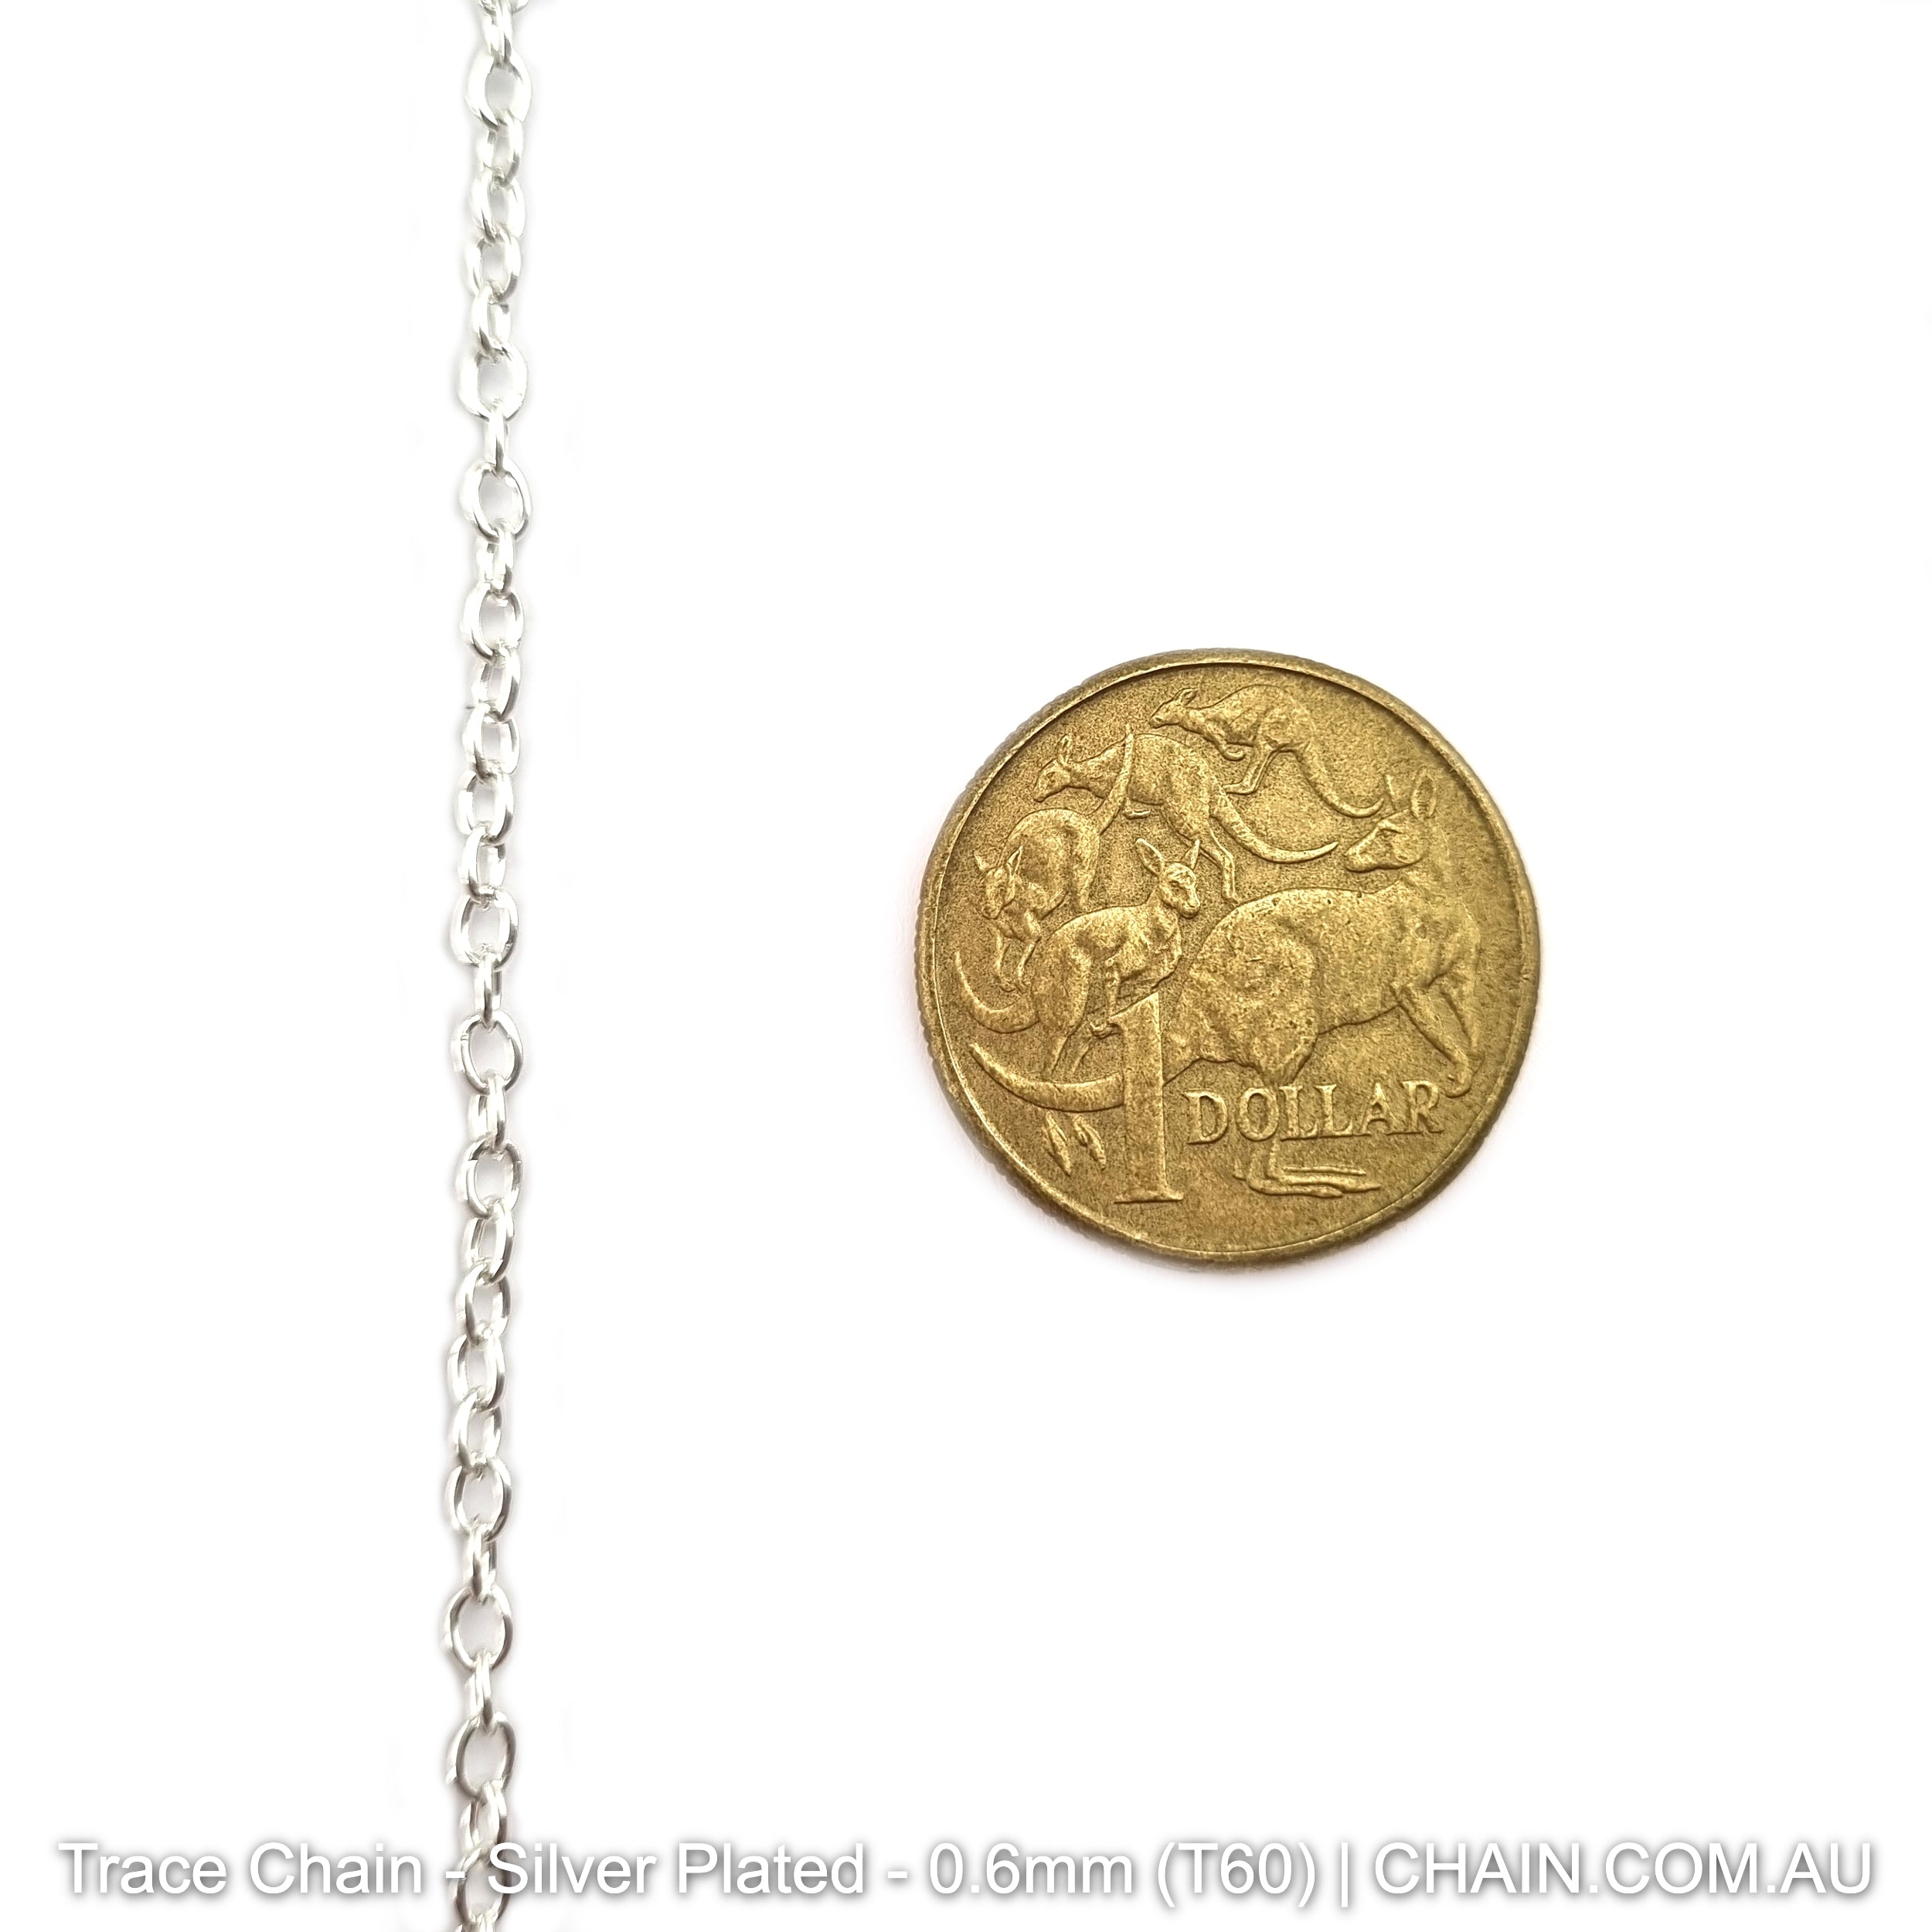 Trace Chain in a Silver Plated Finish. Size: 0.6mm, T60. Jewellery Chain, Australia wide shipping. Shop chain.com.au